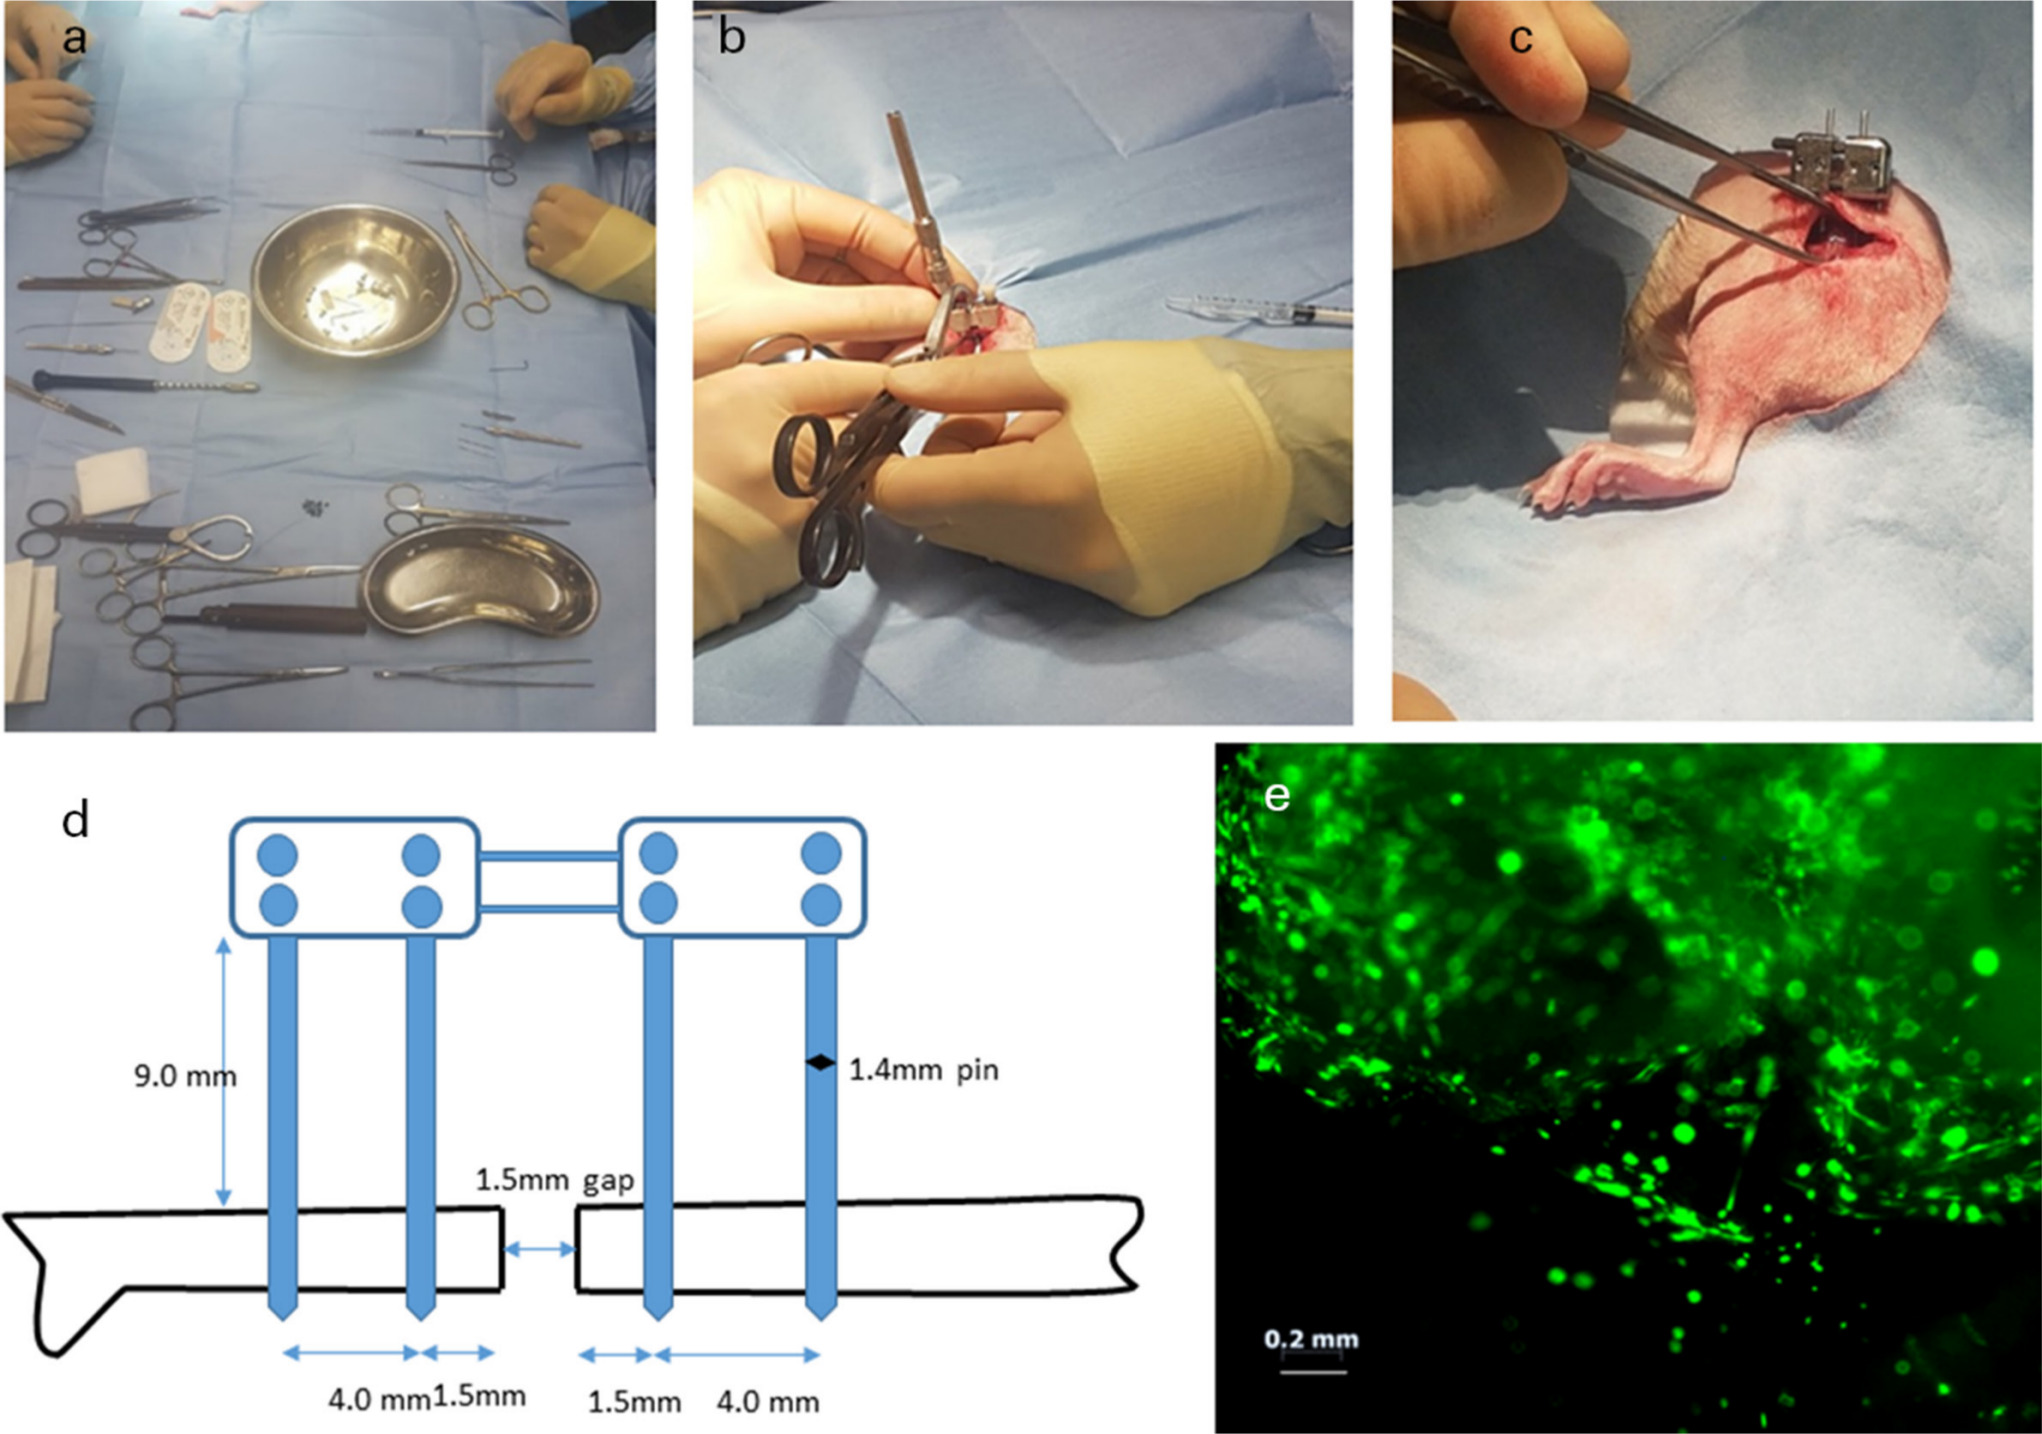 Fig. 1 
            a) Photographs of surgical instruments required, b) intraoperative image of pin placement, and c) intraoperative image of fixator prior to wound closure; d) fluorescent microscope image of cells stained with live-dead in fibrin glue; e) a pictorial representation of the ex-fixator system.
          